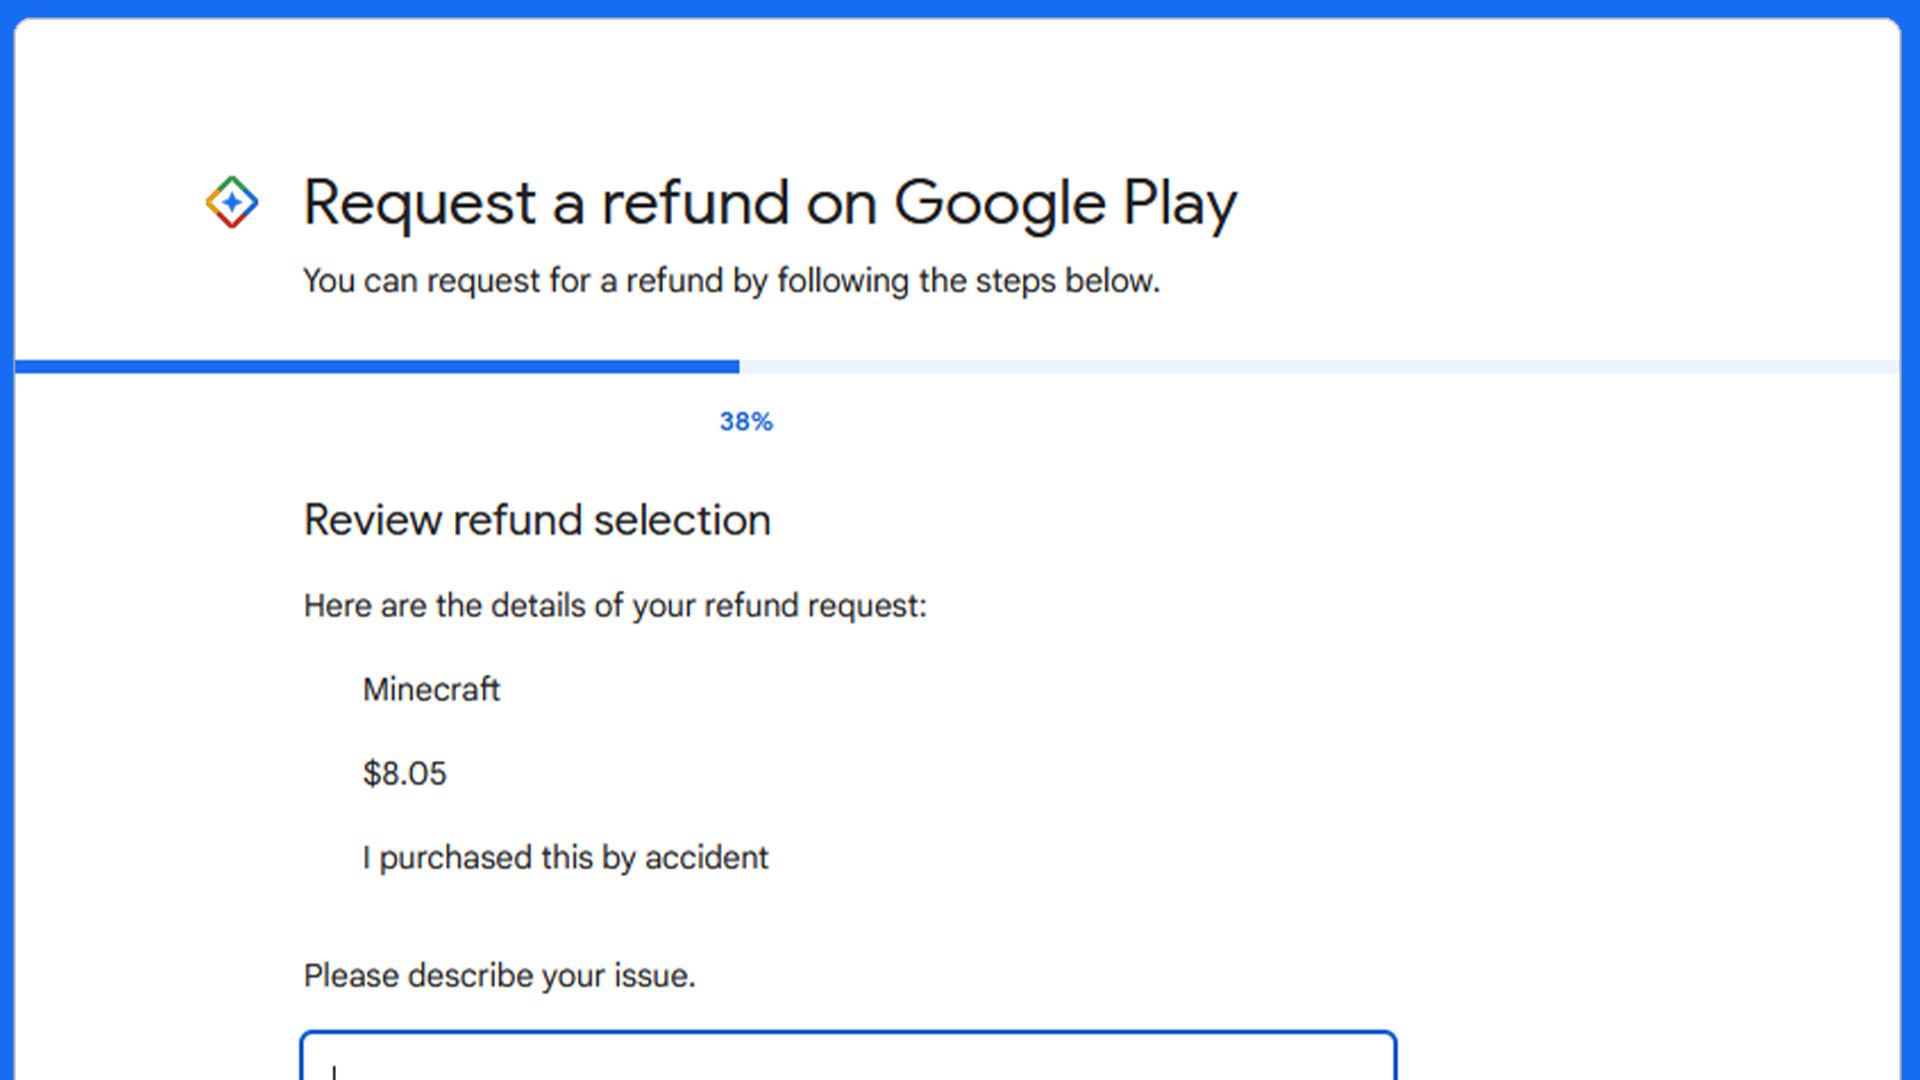 Minecraft refund: says refunded on google play store but I havent got the  money back - Google Play Community